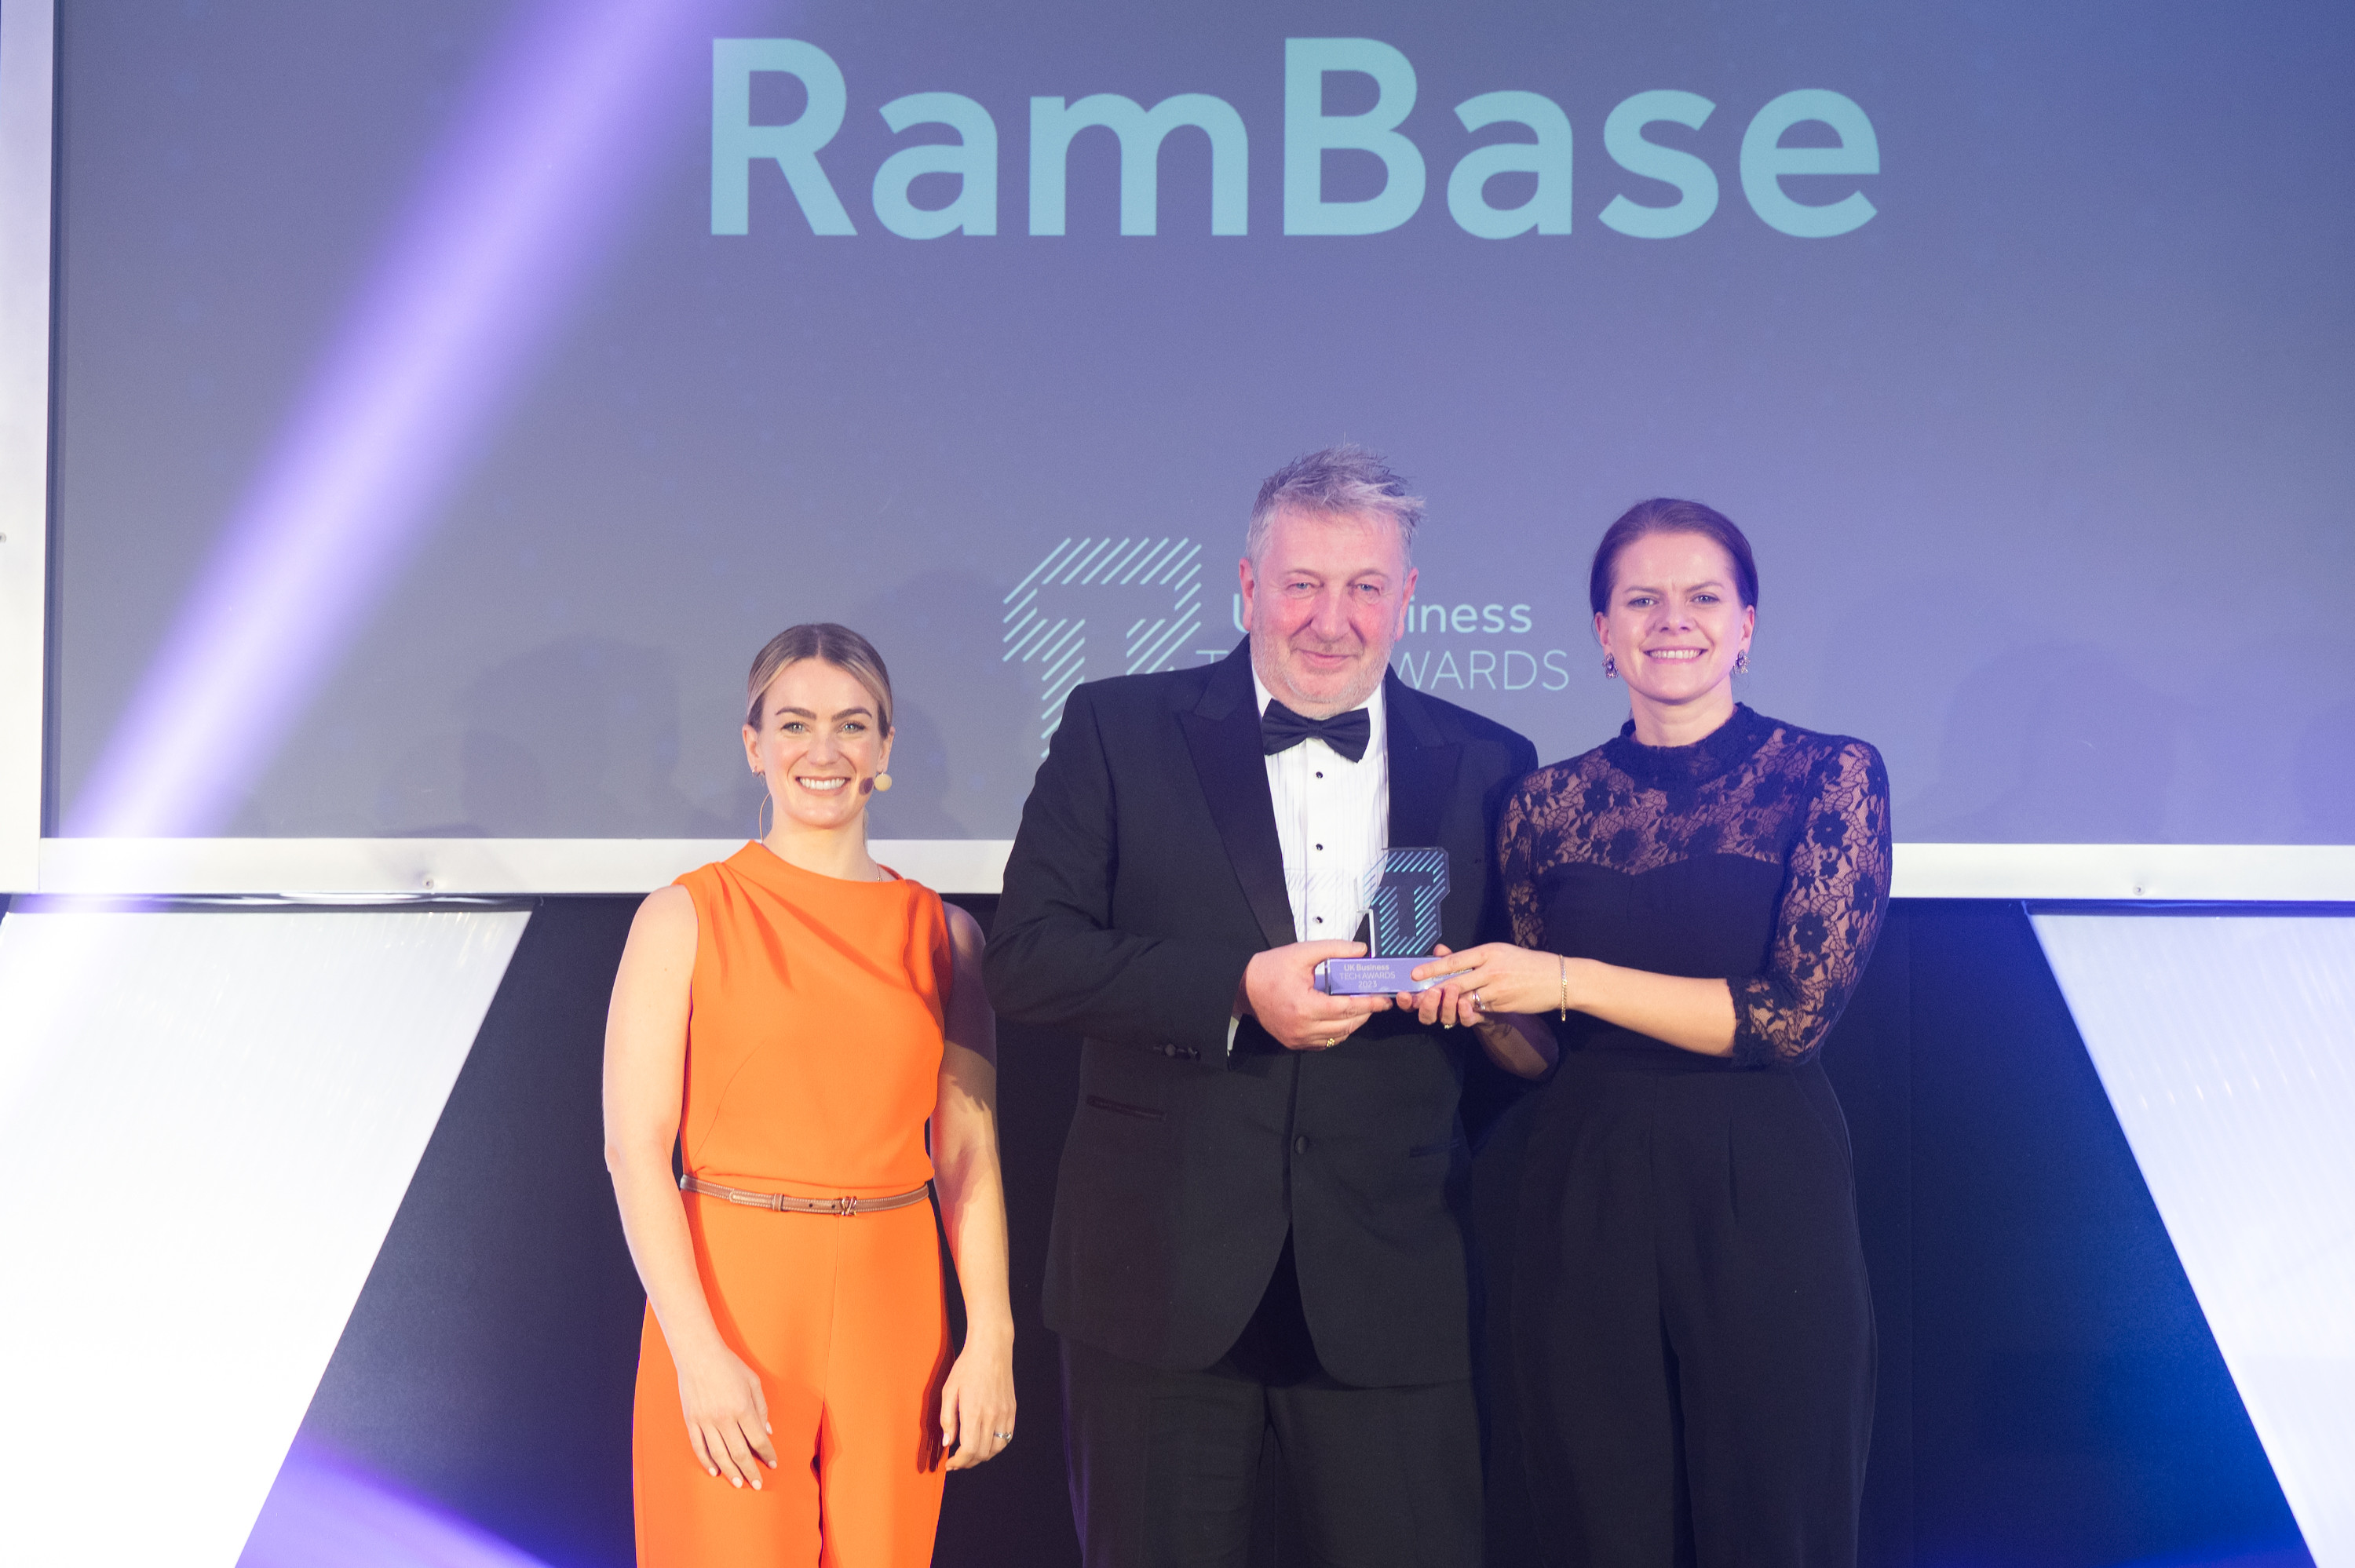 Pictured: Awards presenter Georgie Barrat, RamBase UK Channel Manager, Peter Fehily and RamBase Content Manager, Elisabeth. M. Aardal.